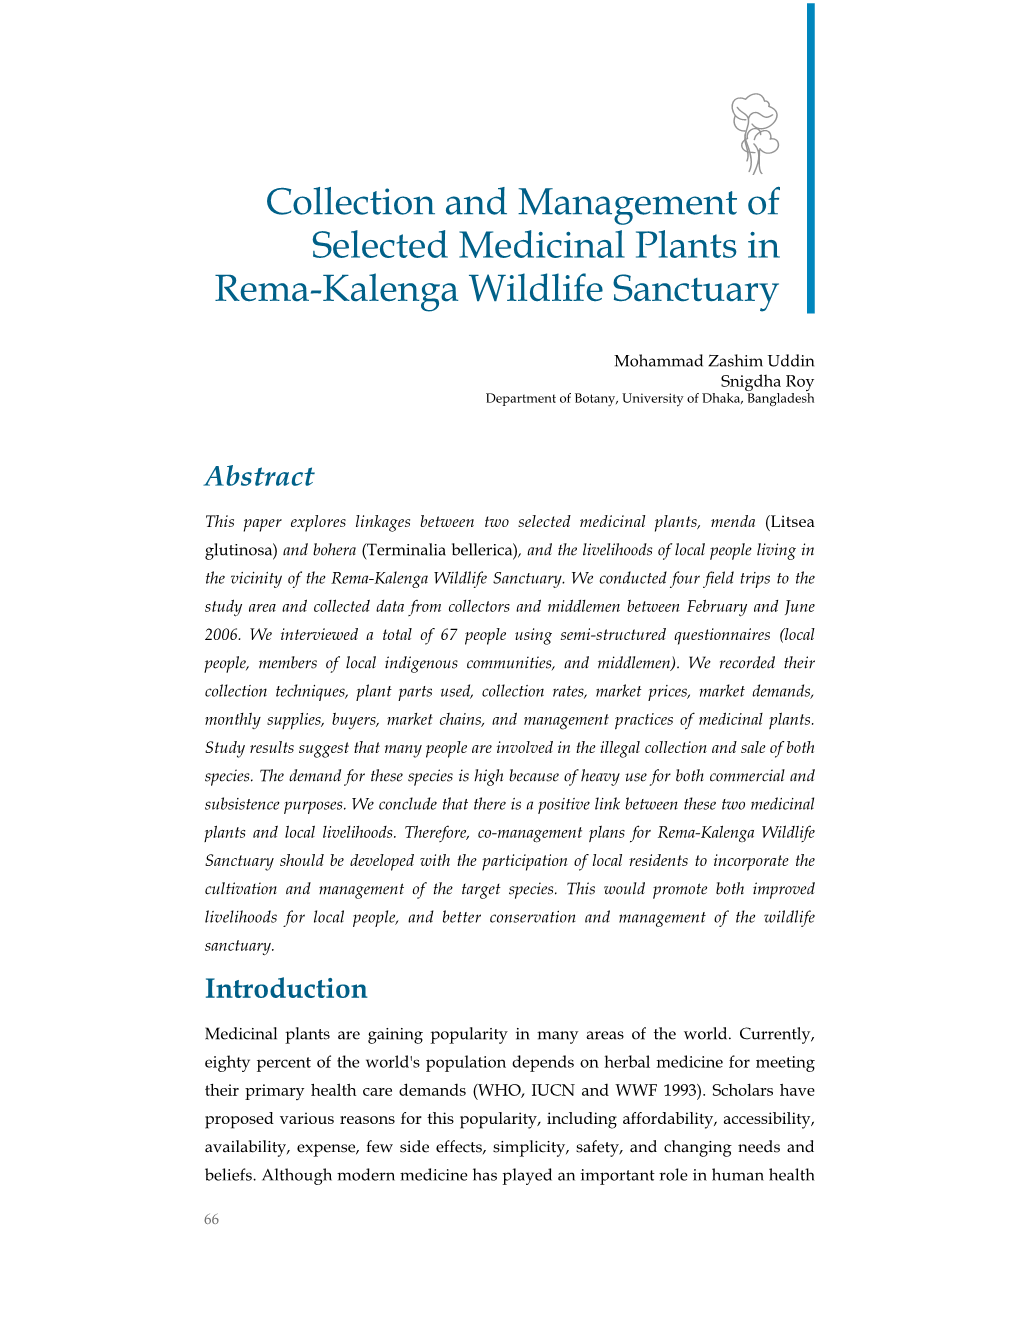 Paper 4. Collection and Management of Selected Medicinal Plants in Rema-Kalenga Wildlife Sanctuary